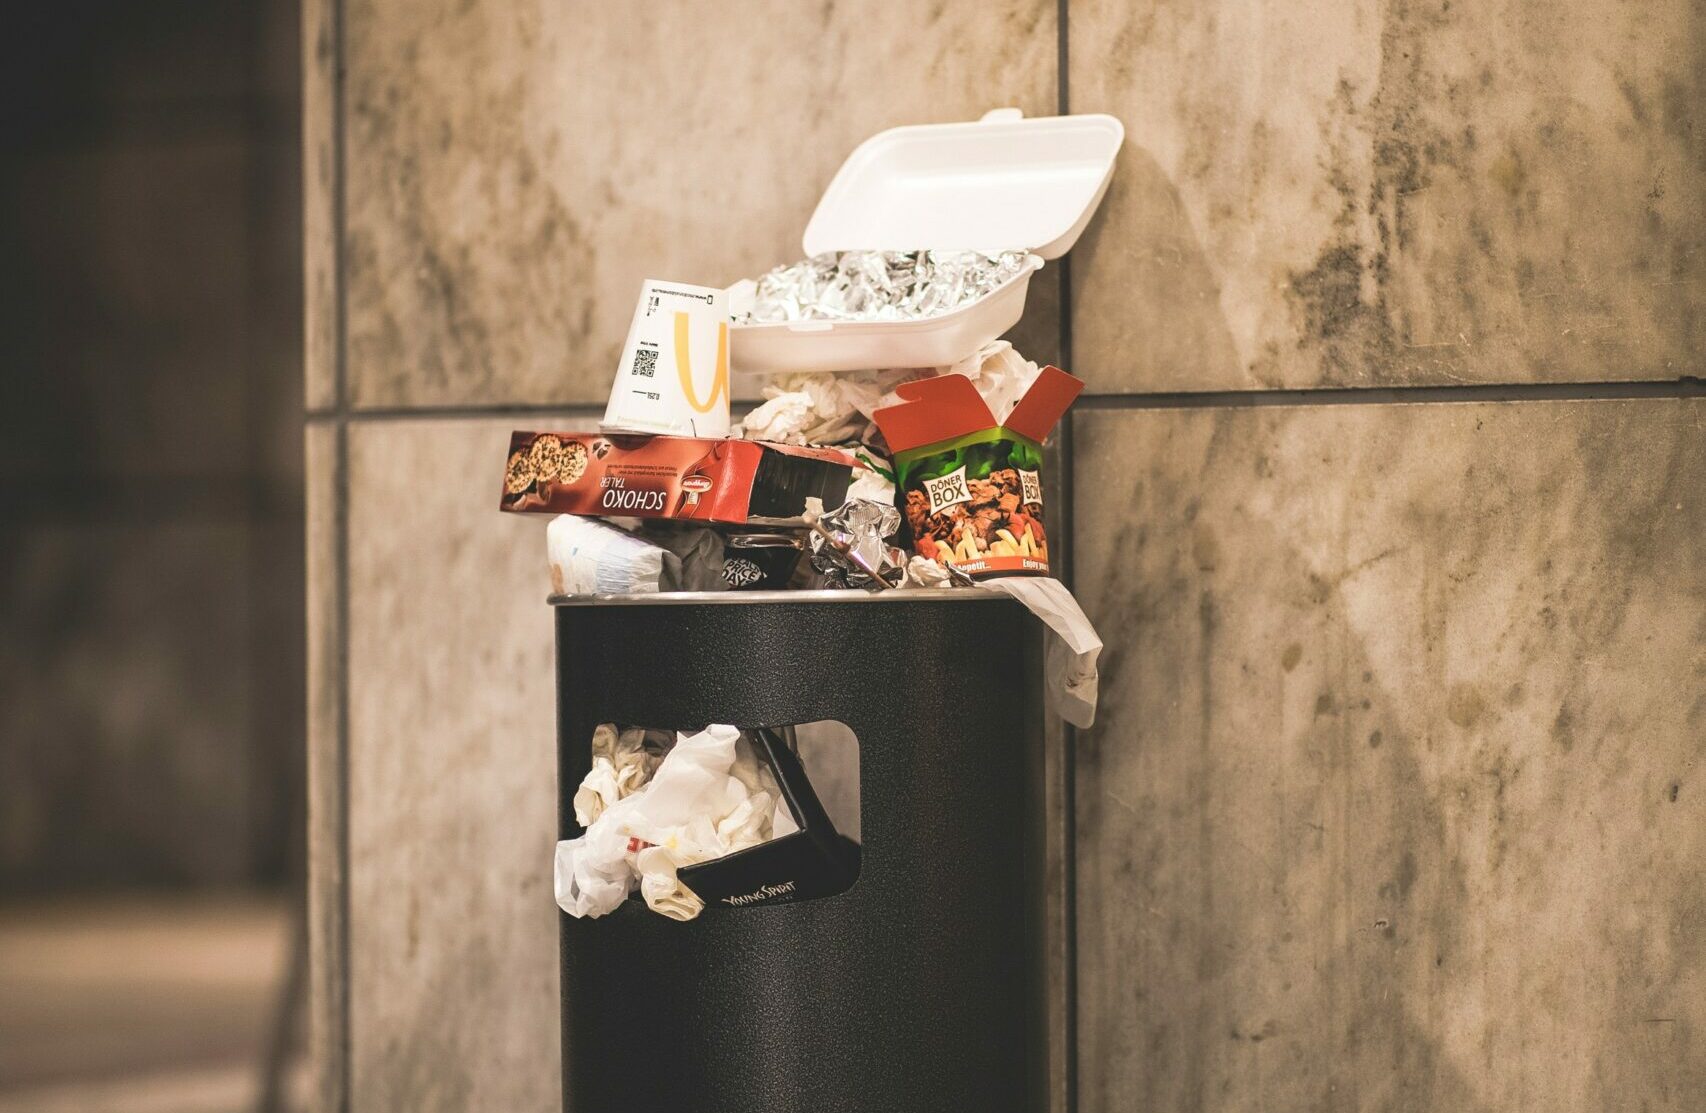 food waste overflows in the trash